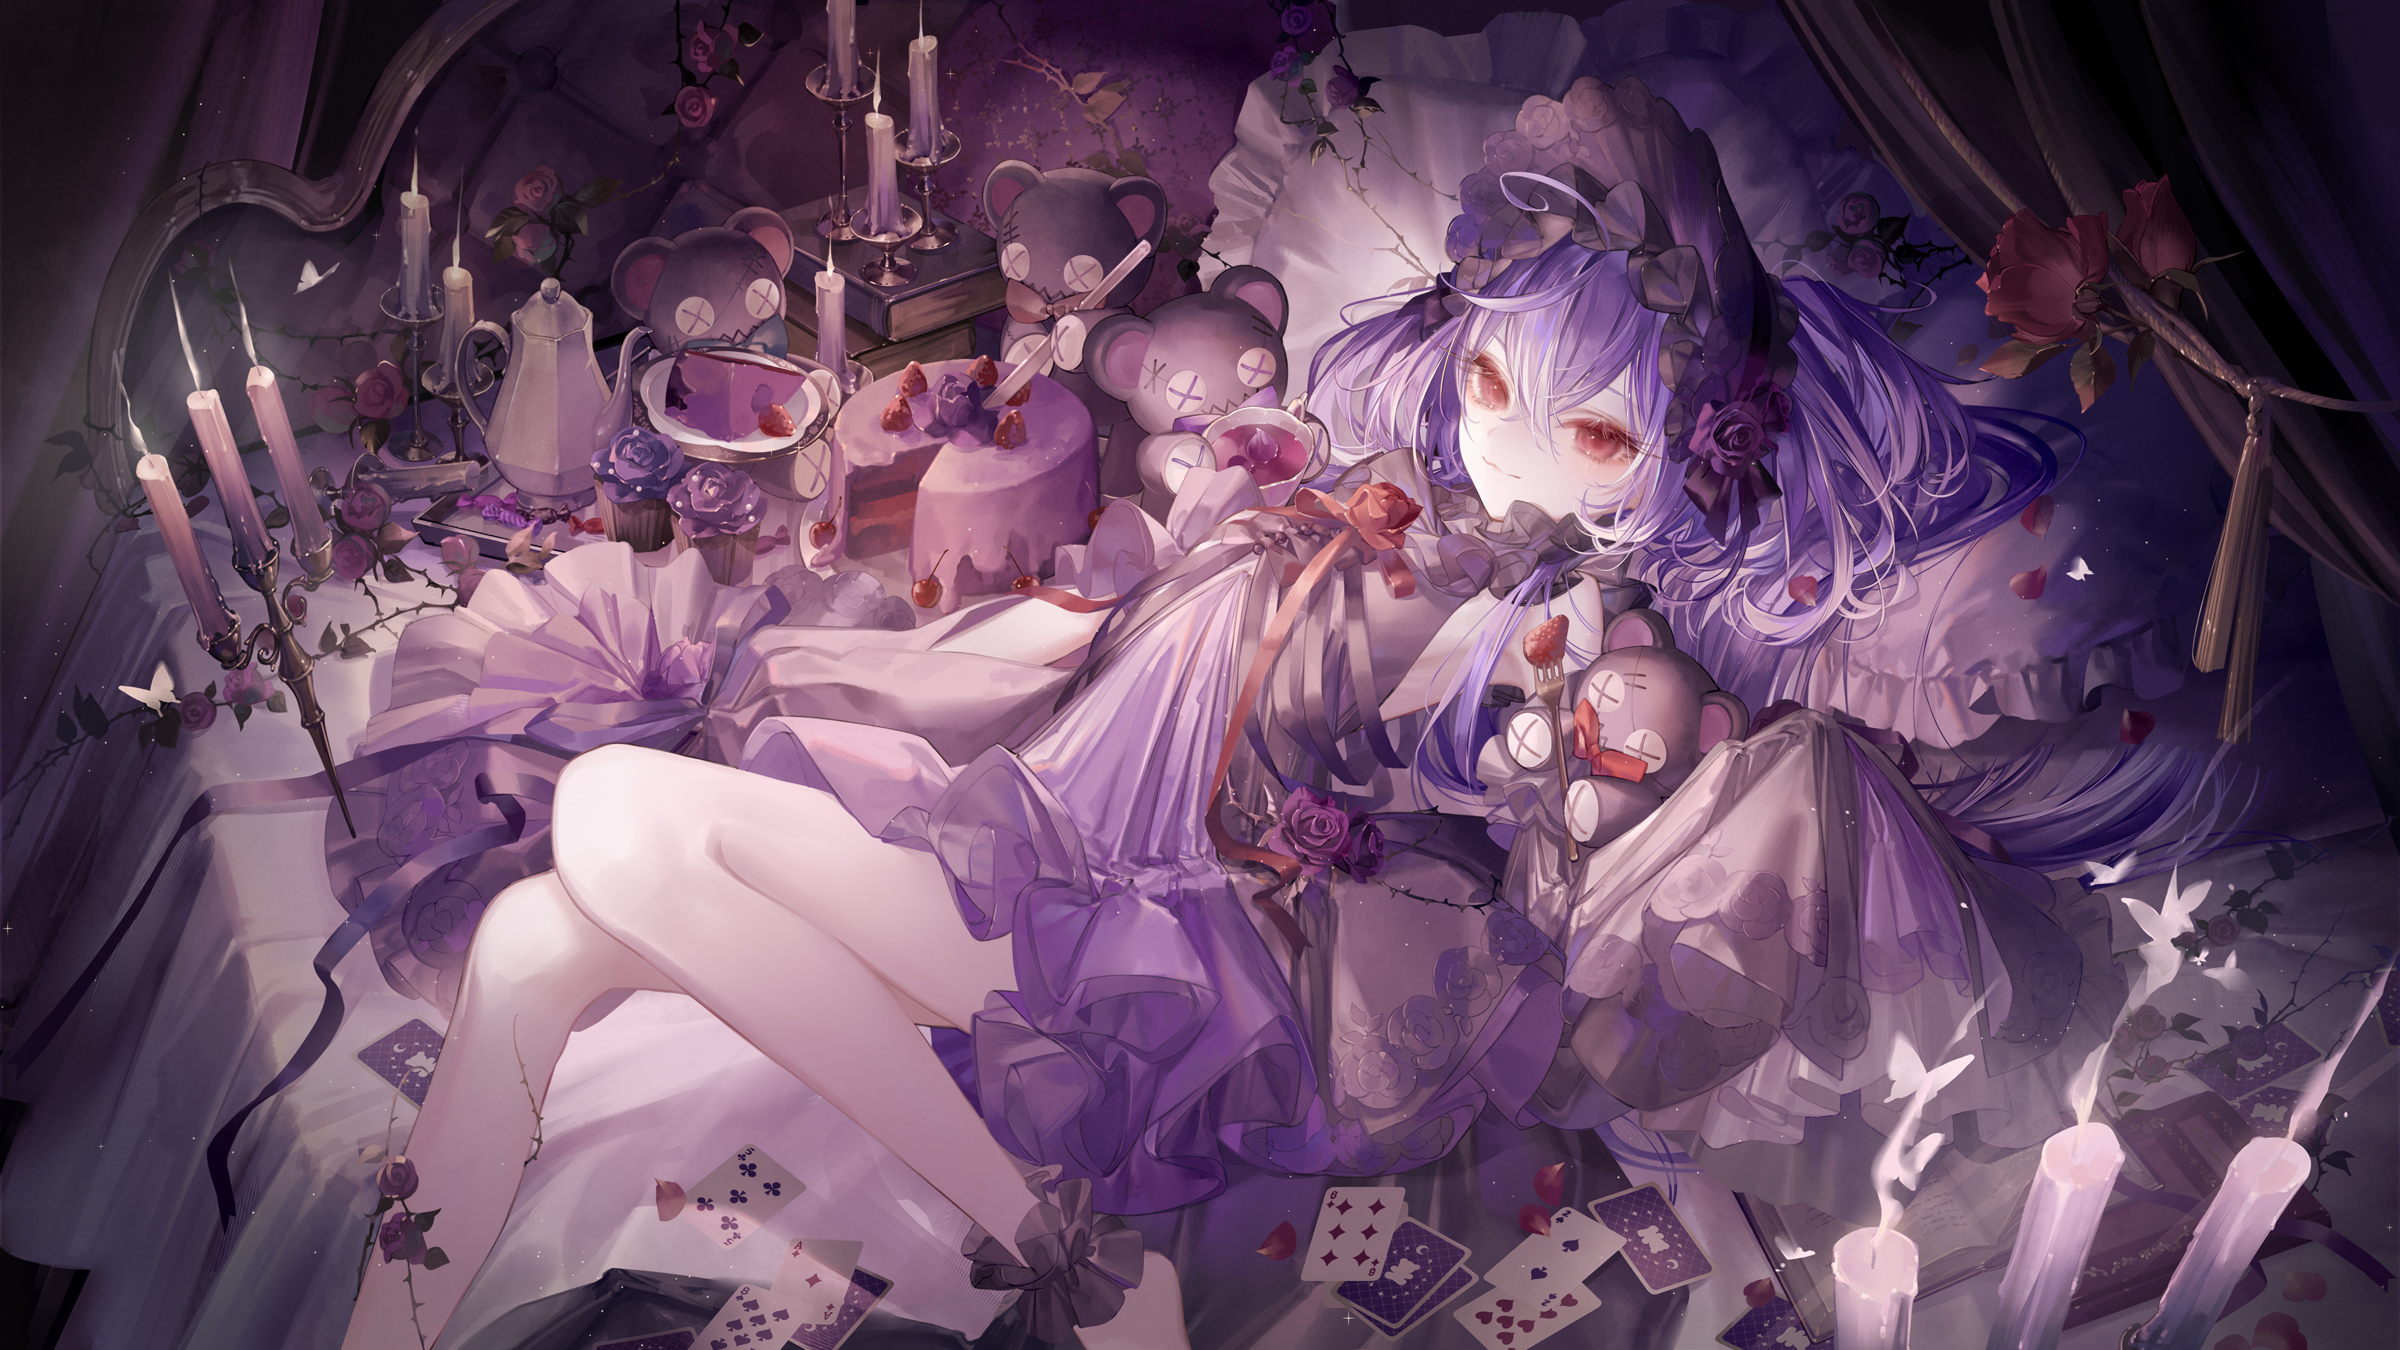 Anime 2400x1350 anime anime girls 774 inc Virtual Youtuber Yoggi Shisui Kiki looking at viewer candles hair between eyes long hair lying down lying on back cake knife cards closed mouth smiling tray sweets candy cupcakes purple hair flower in hair books lolita fashion bent legs petals pillow cup drink in bed bed frills butterfly insect